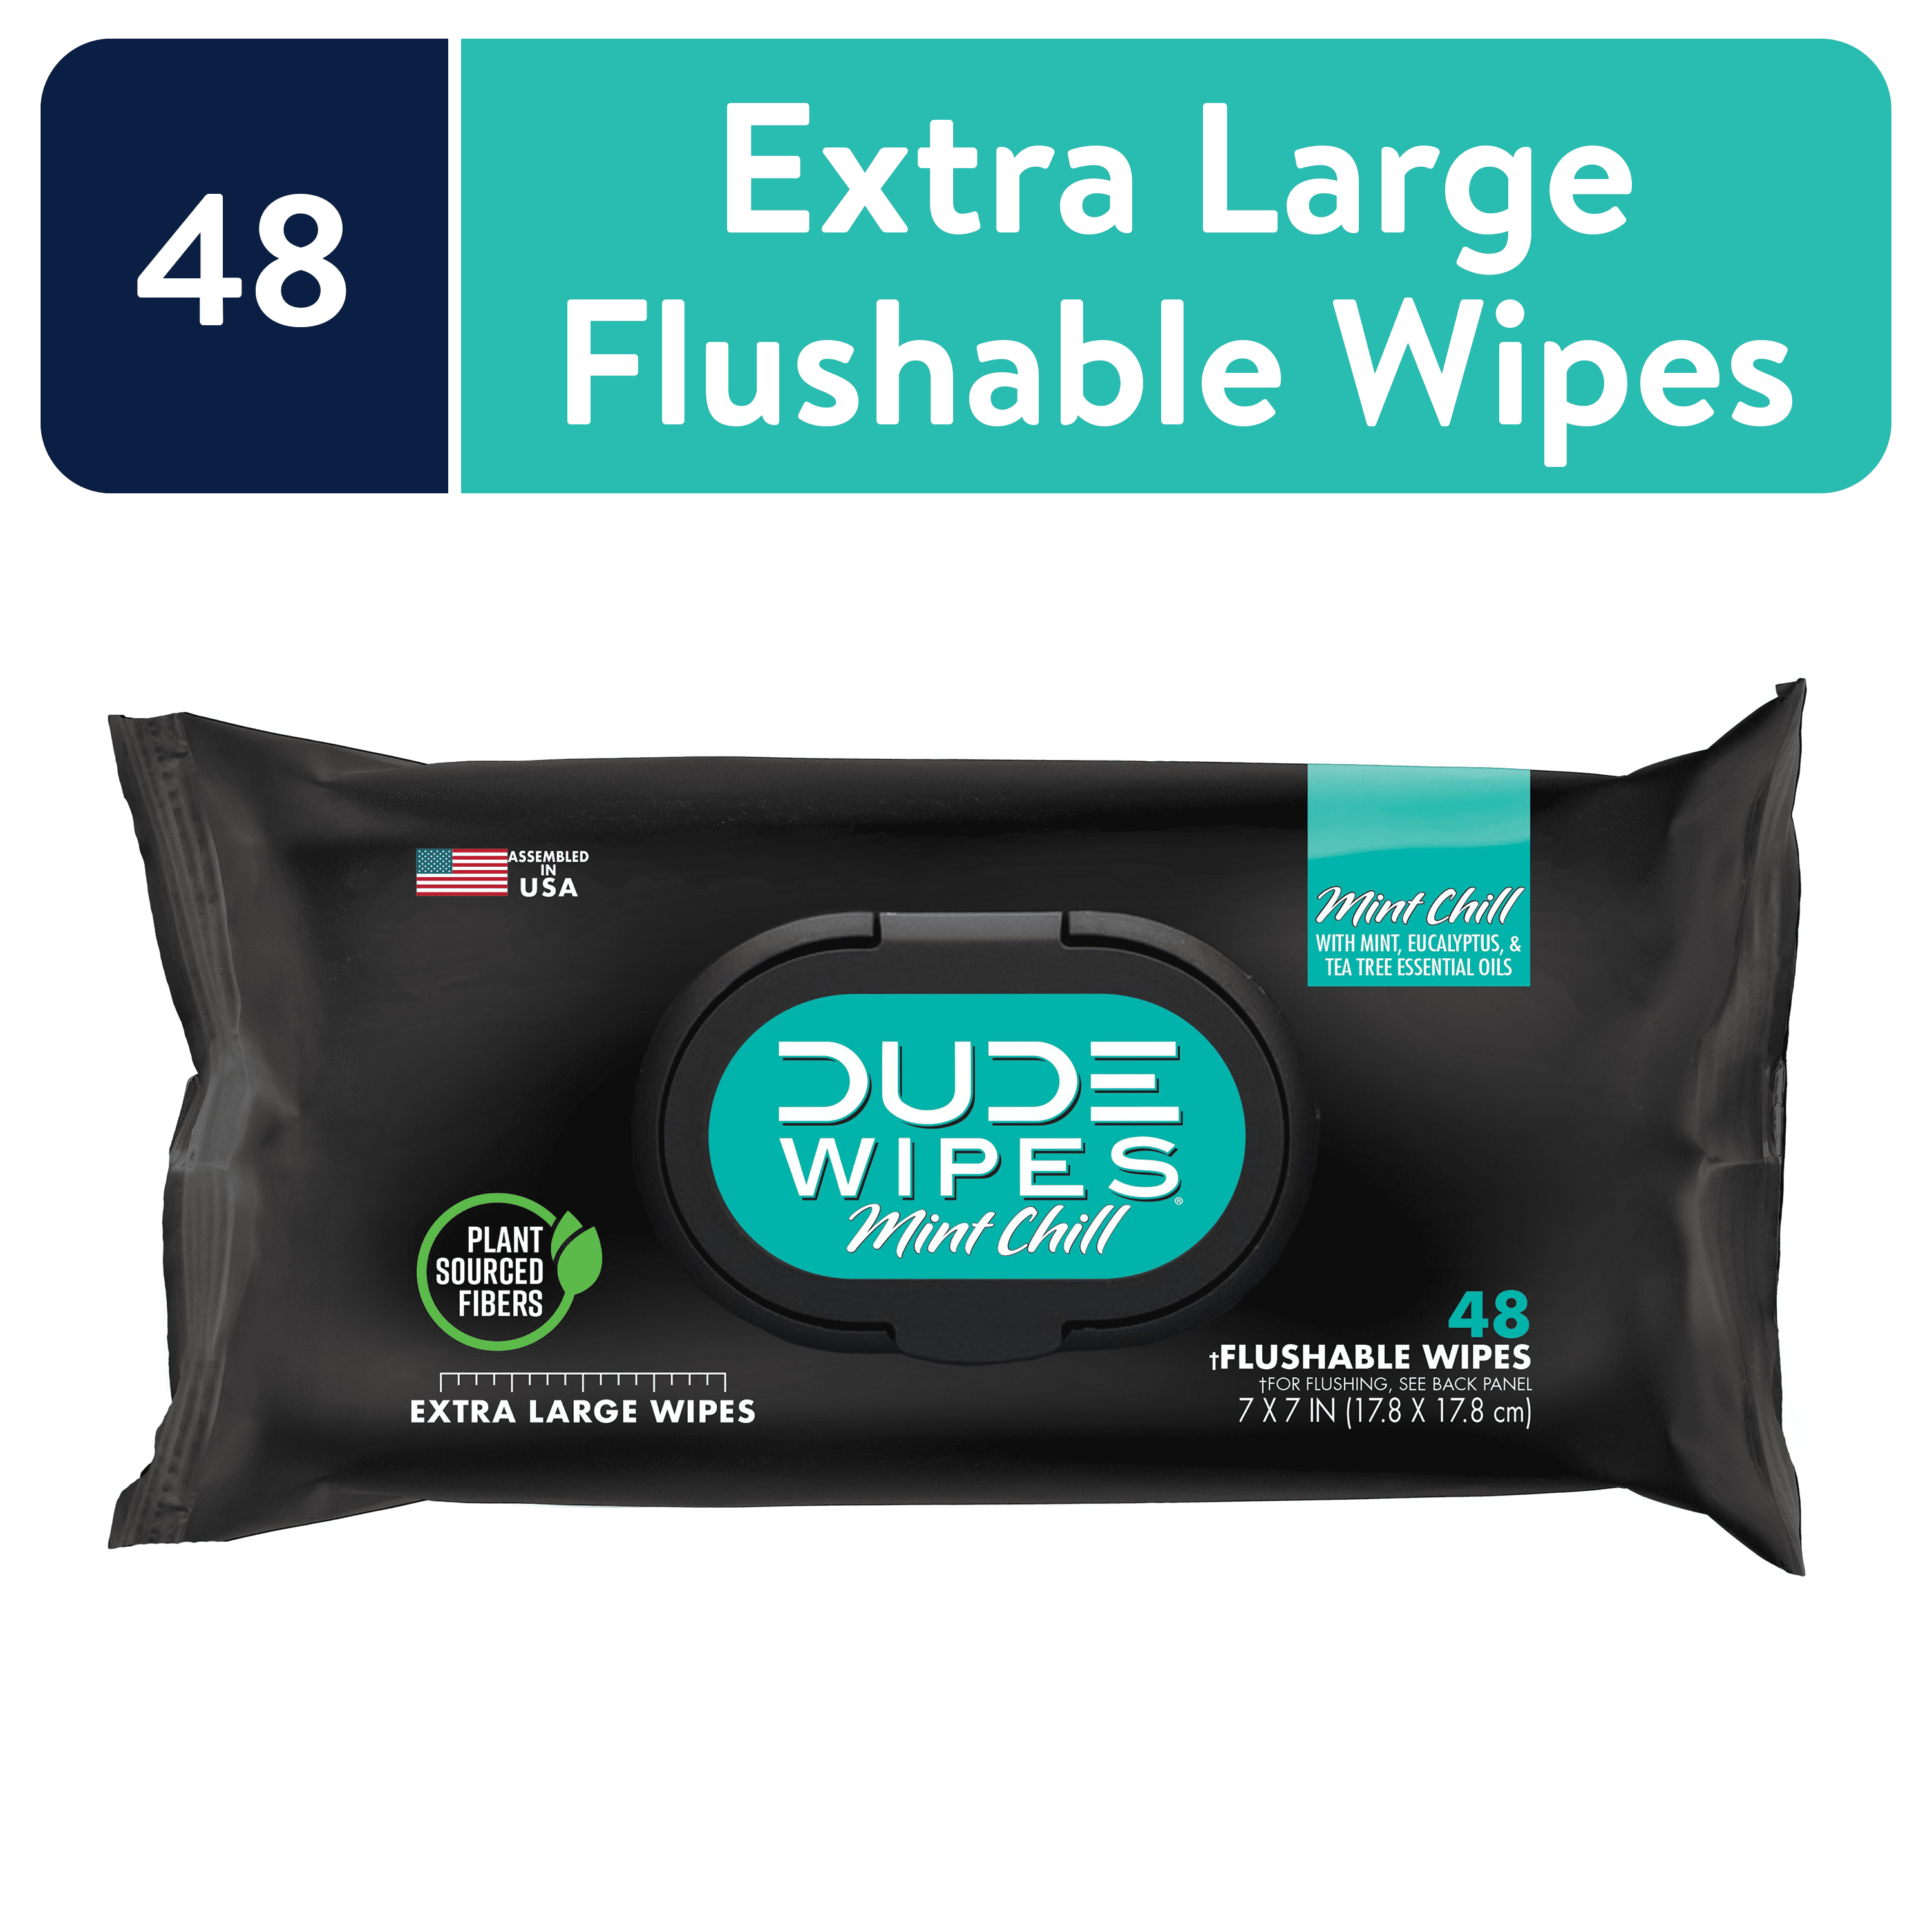 DUDE Wipes Flushable Wipes, Mint Chill XL Wet Wipes to Use with Toilet Paper, 48 Ct